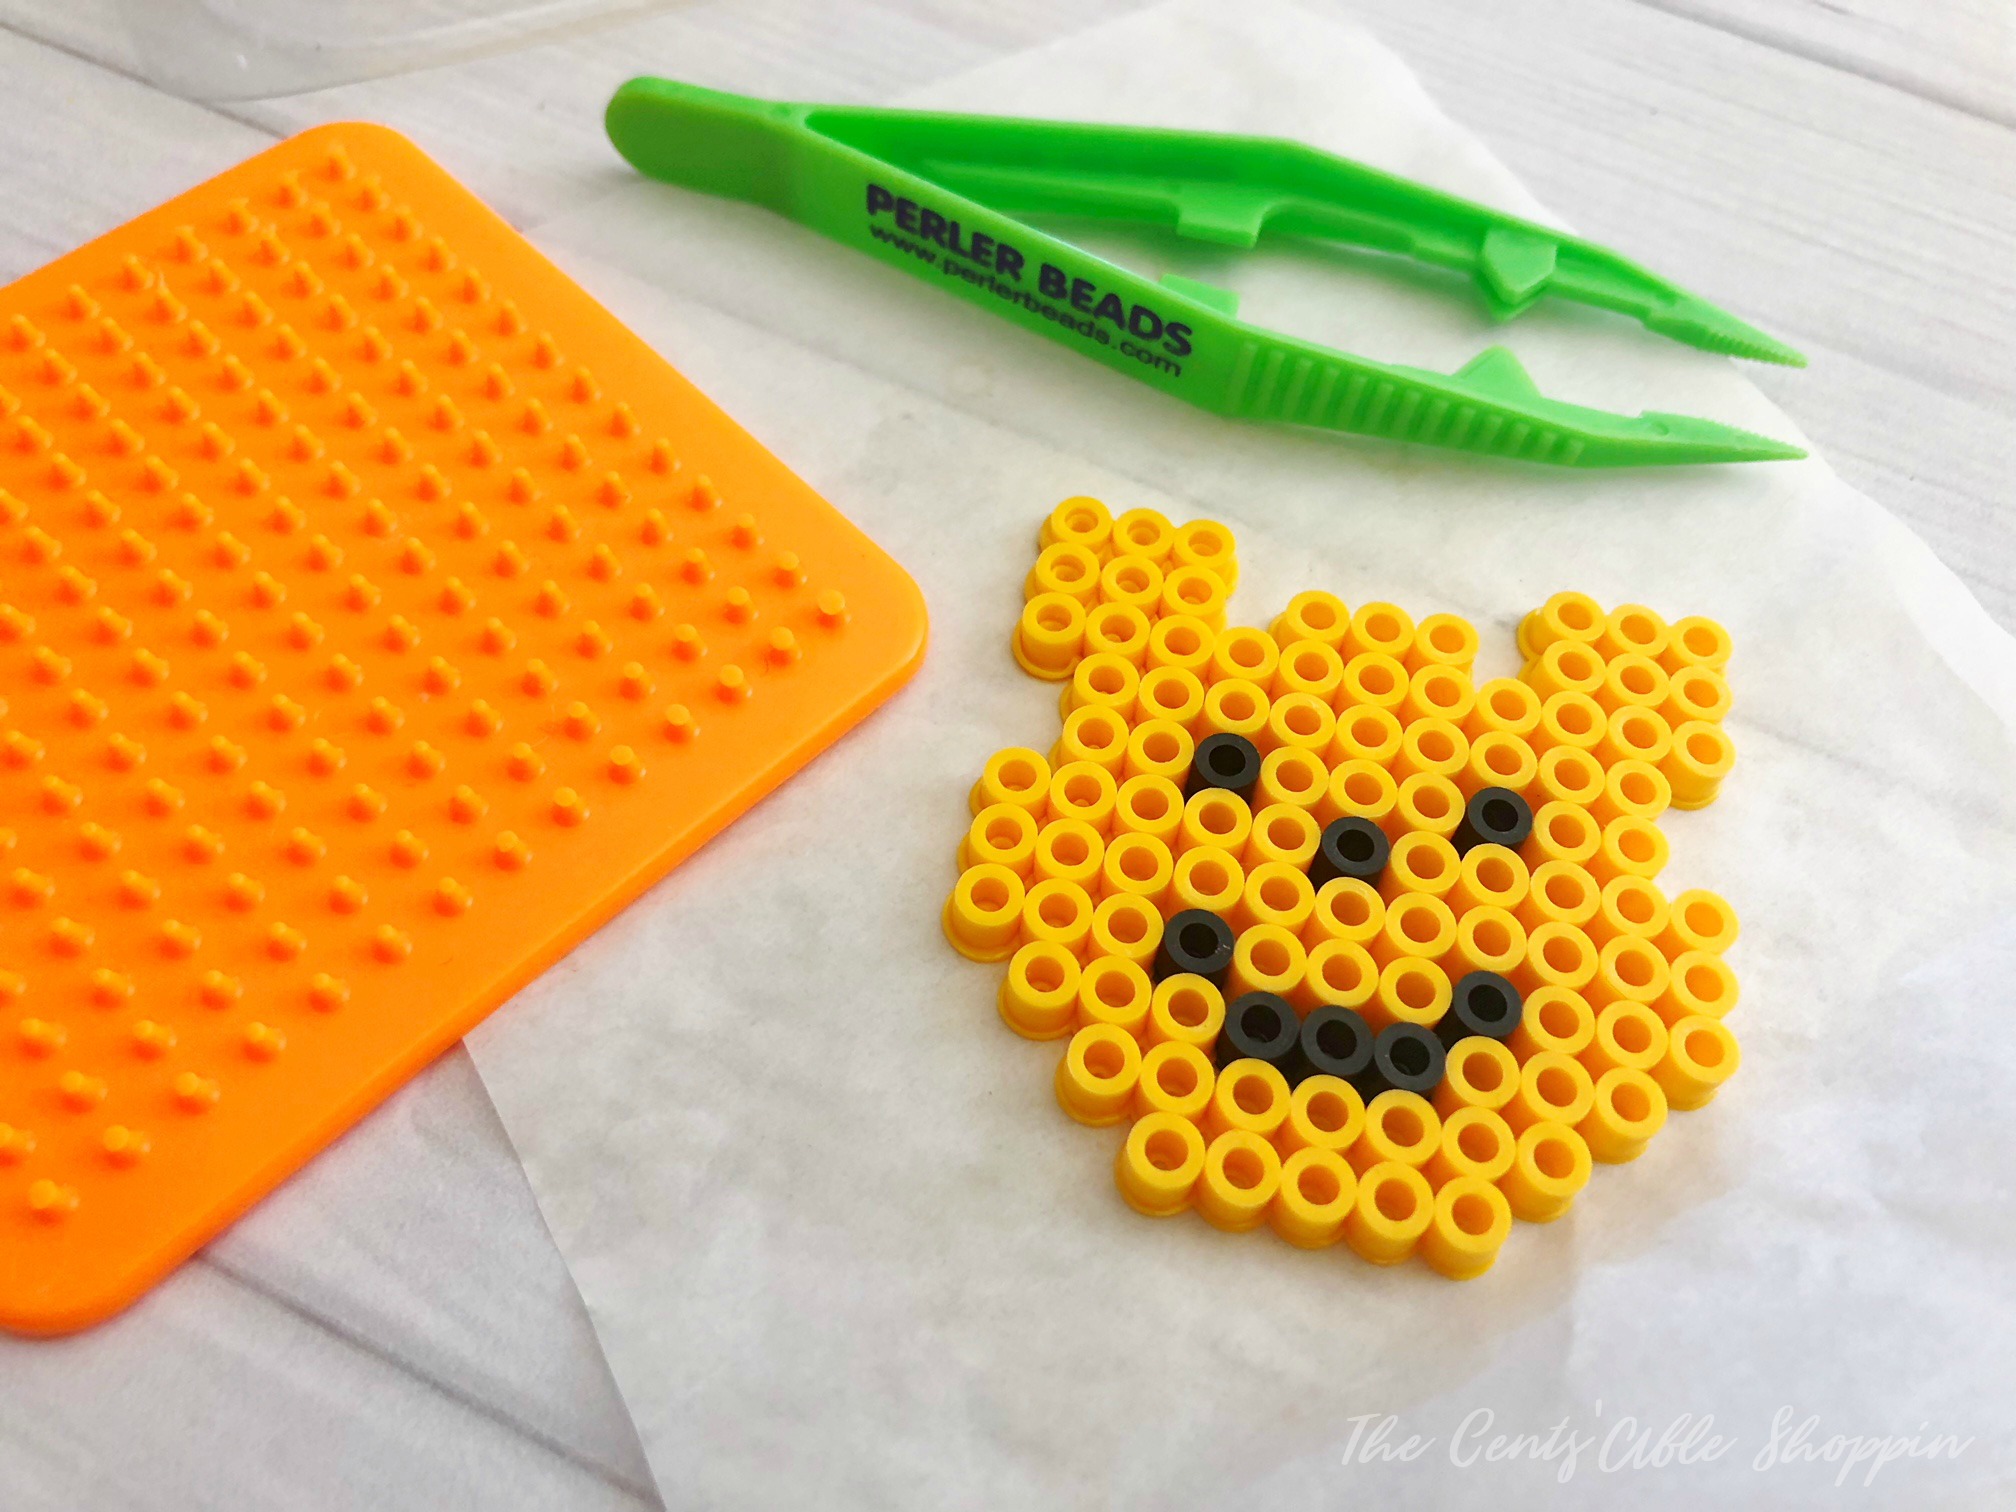 This Pooh Perler Bead Keychain is simple to make and surprisingly cute to make year round! They are a fun way to keep kids busy on hot or rainy days!